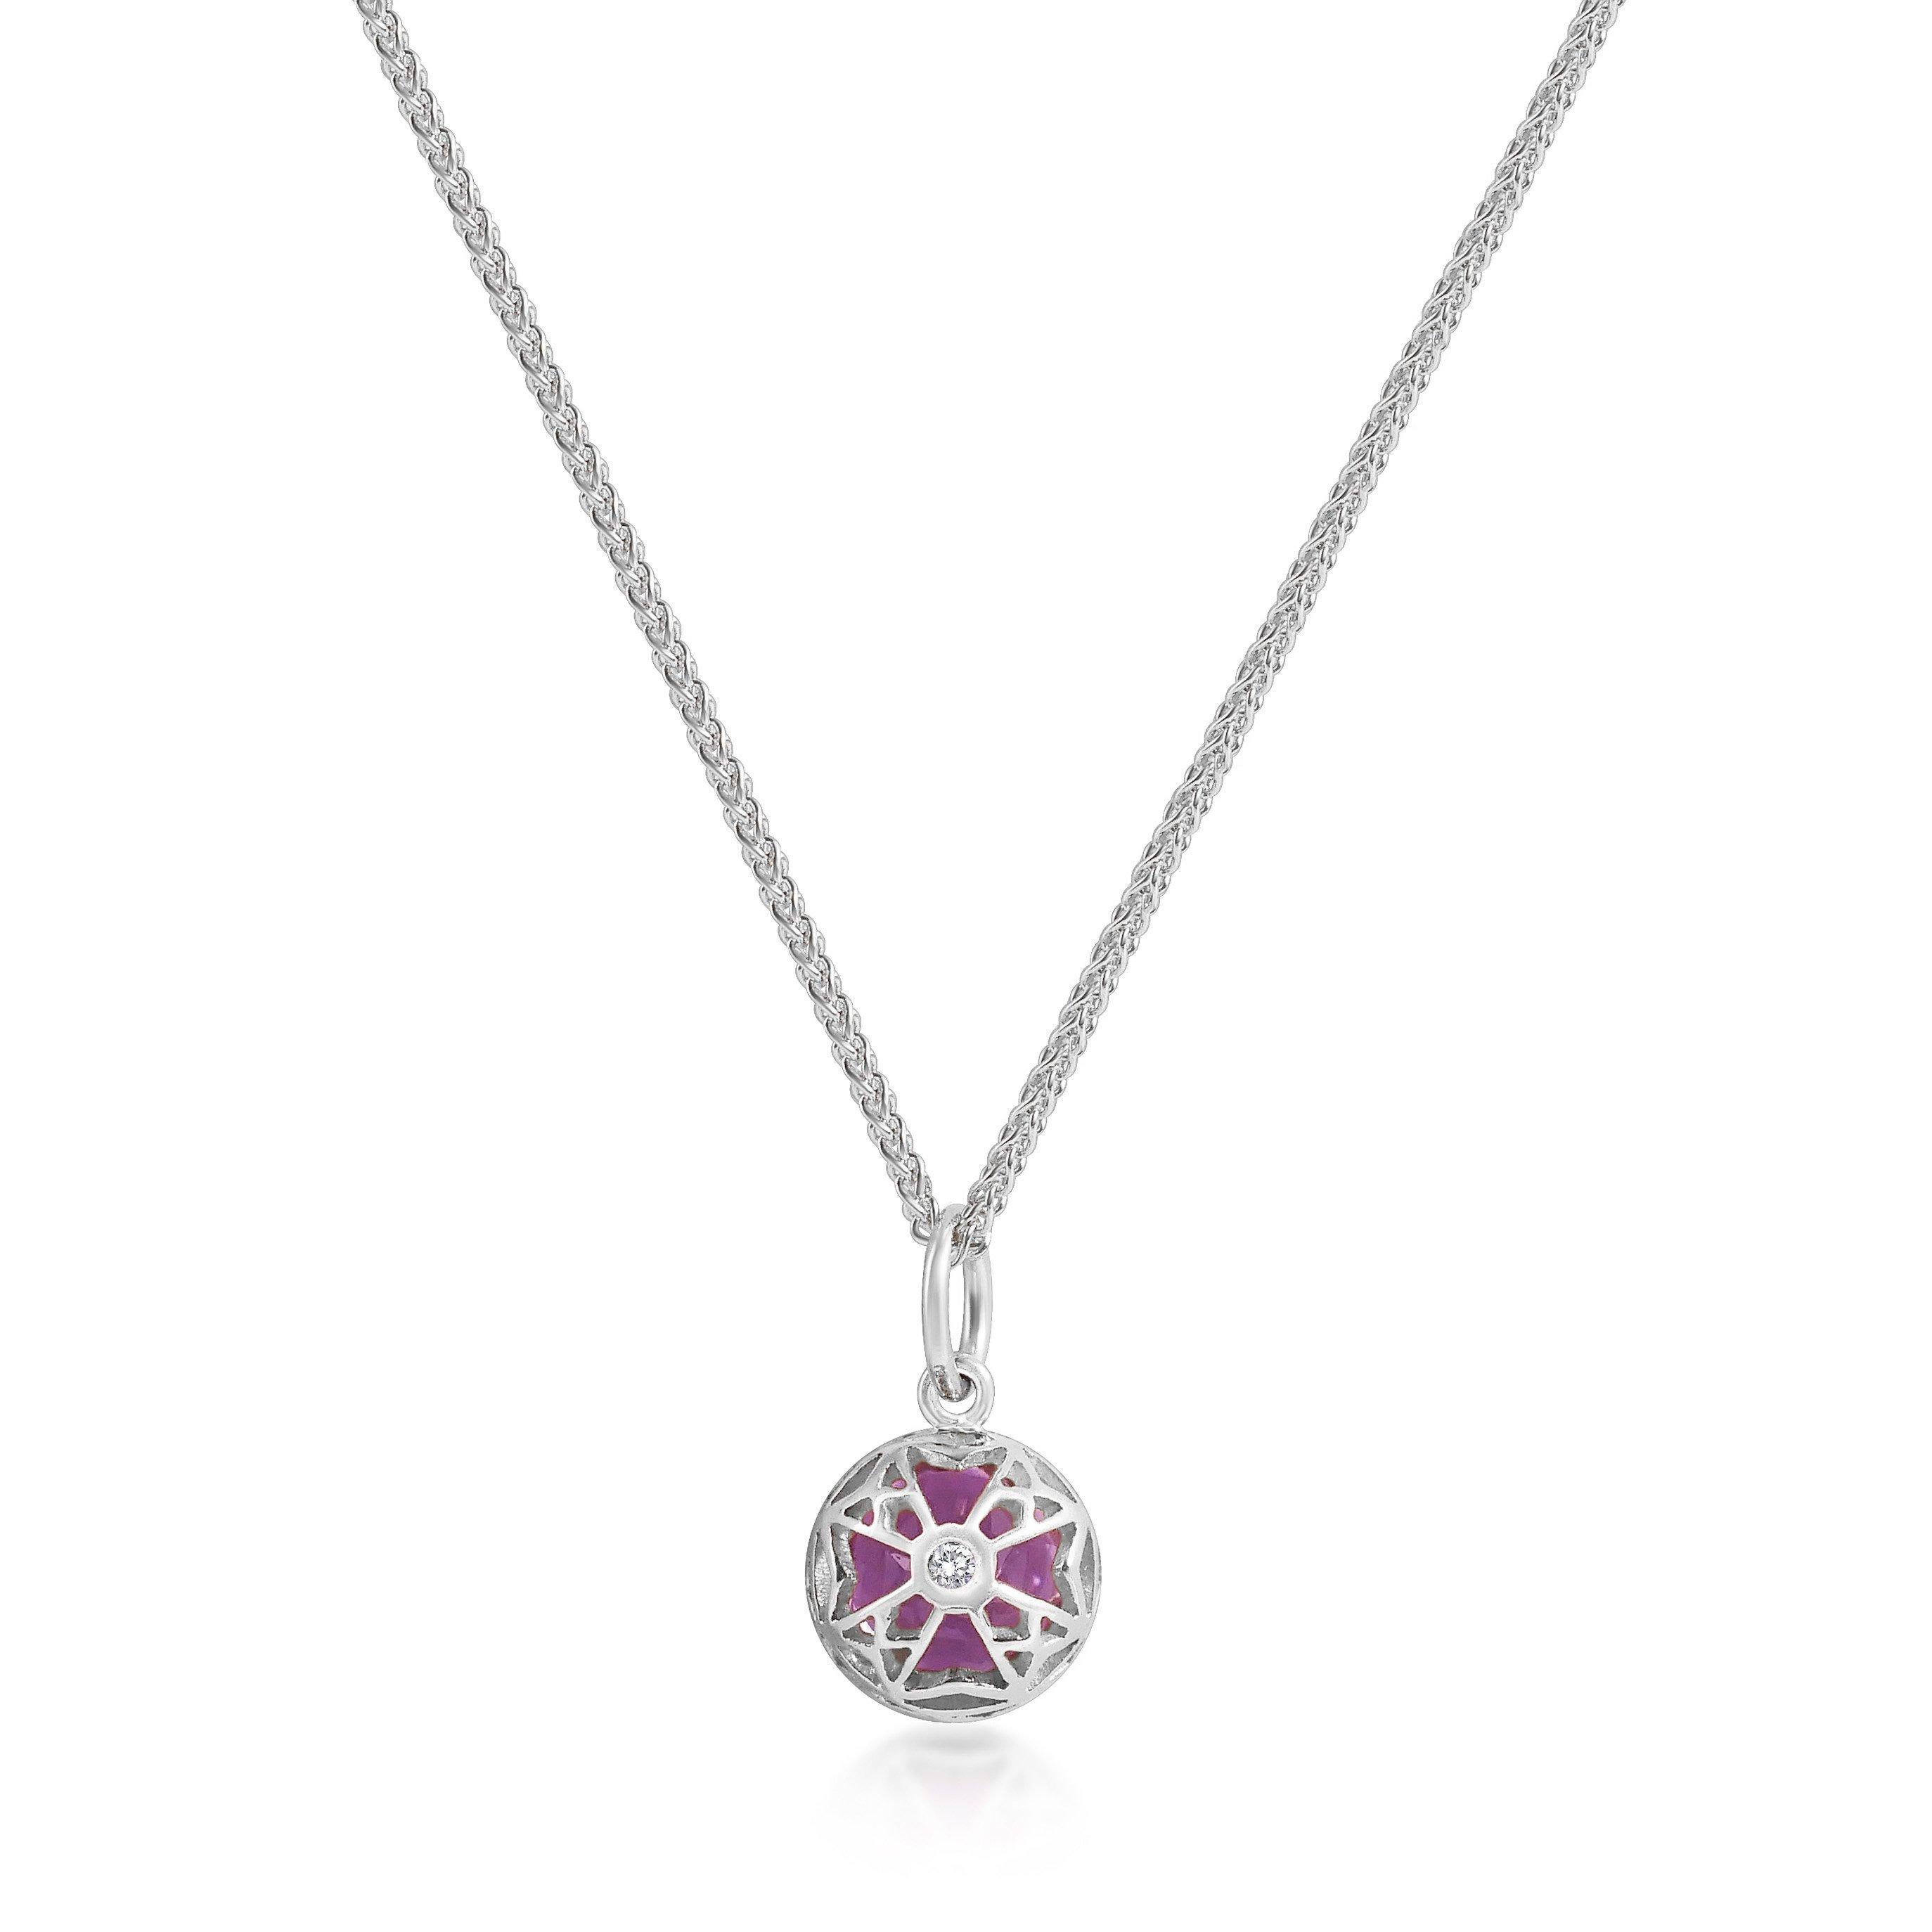 Handcrafted 1.20 Carats Amethyst 18 Karat White Gold Pendant Necklace. The 7mm natural stone is set in our iconic hand pierced gold lace to let the light through. Our pendants are the ideal gift. 

Here presented on our finely knitted gold chains.